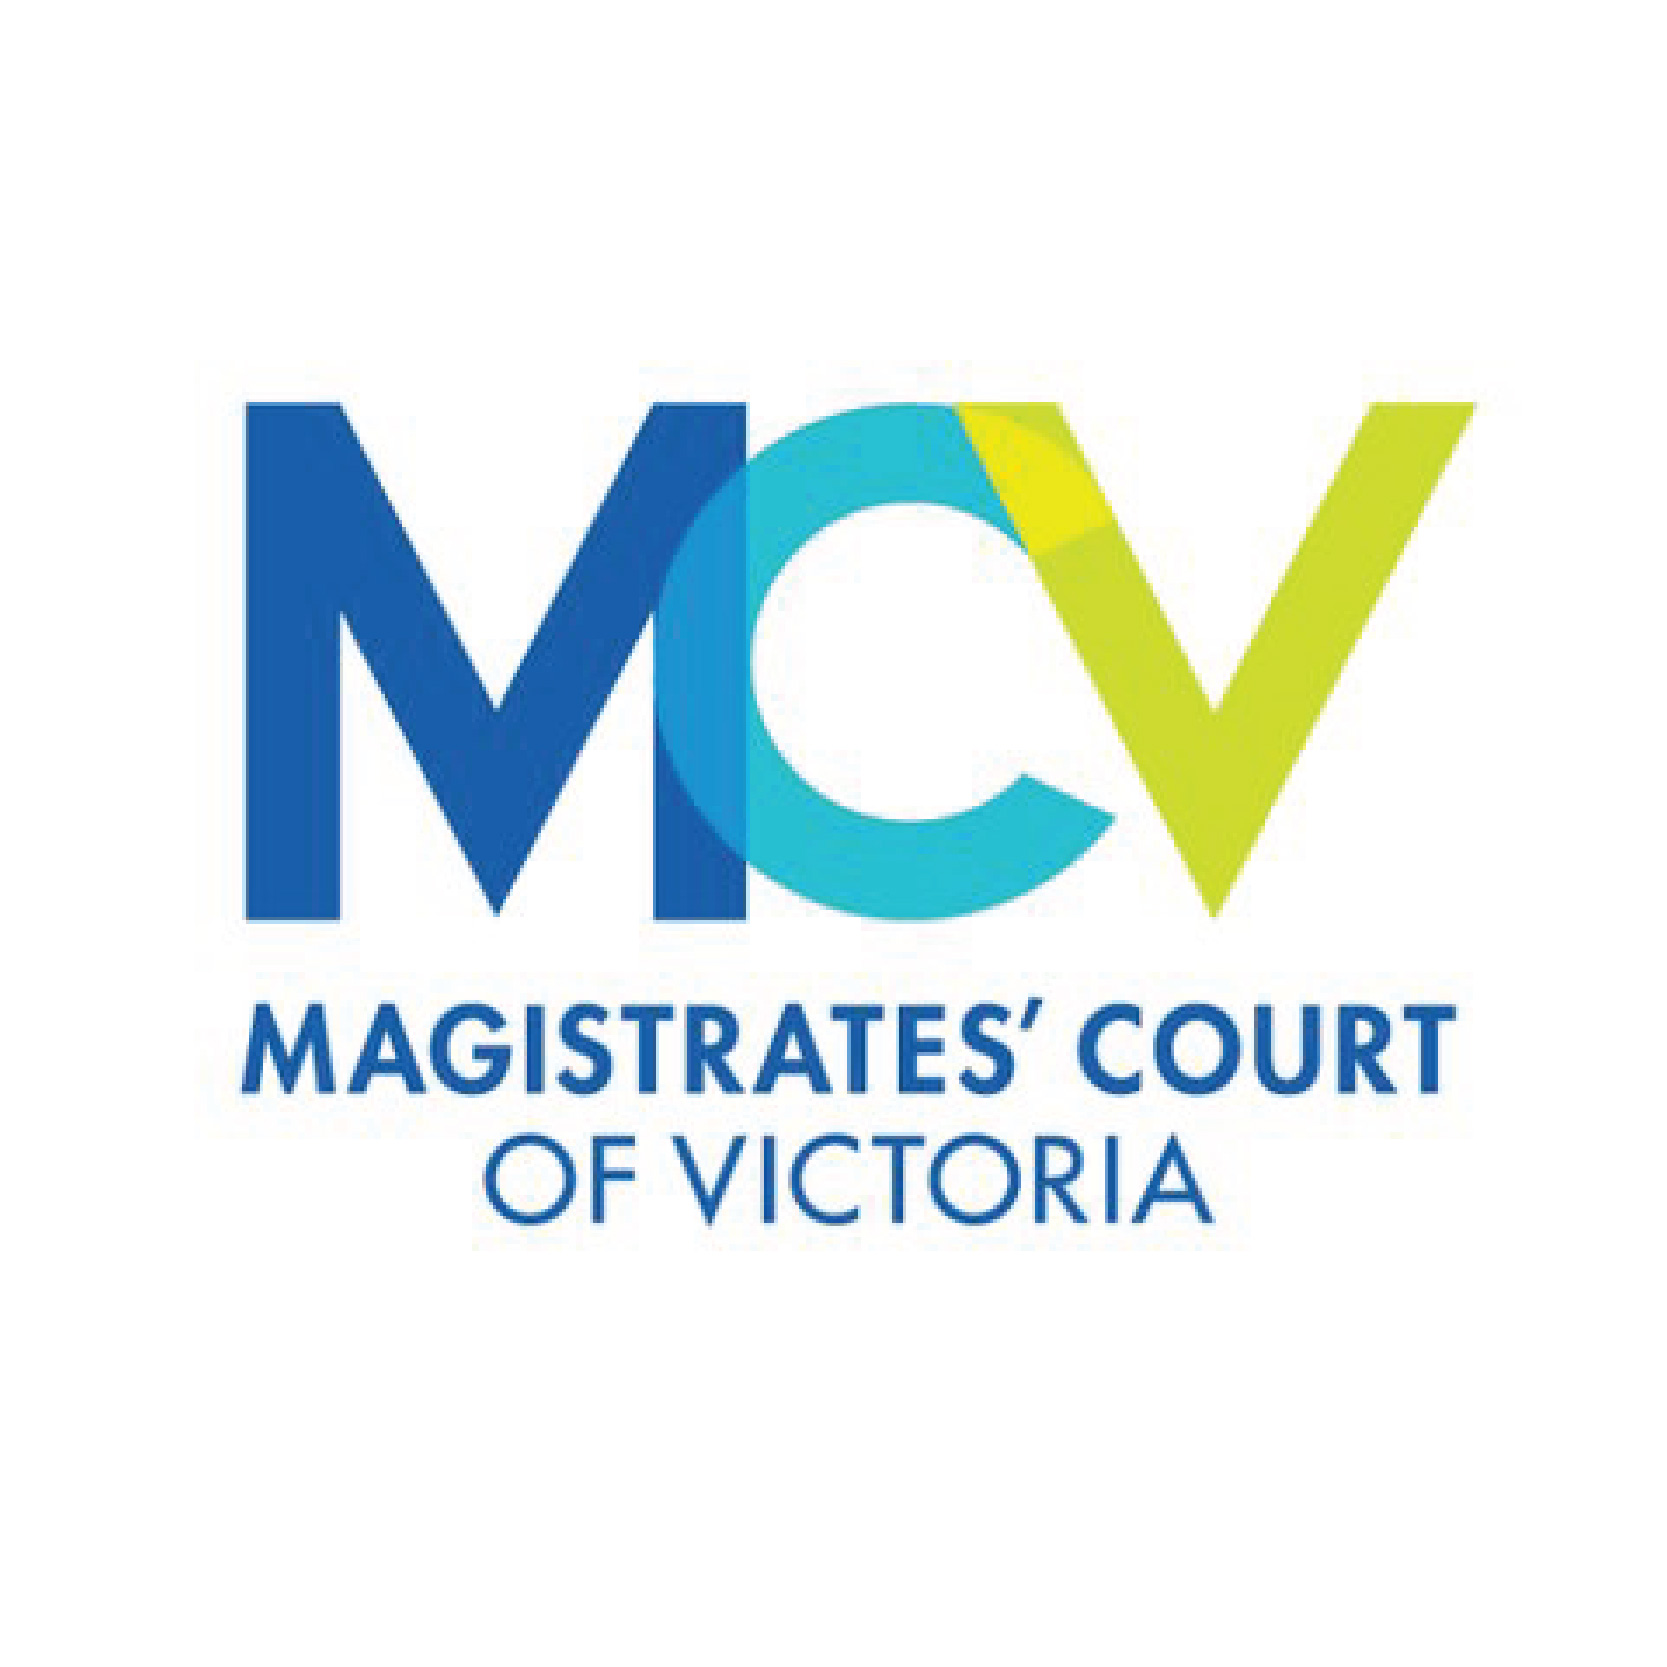 Our clients include household Australian names such as the Magistrates Court of Victoria.